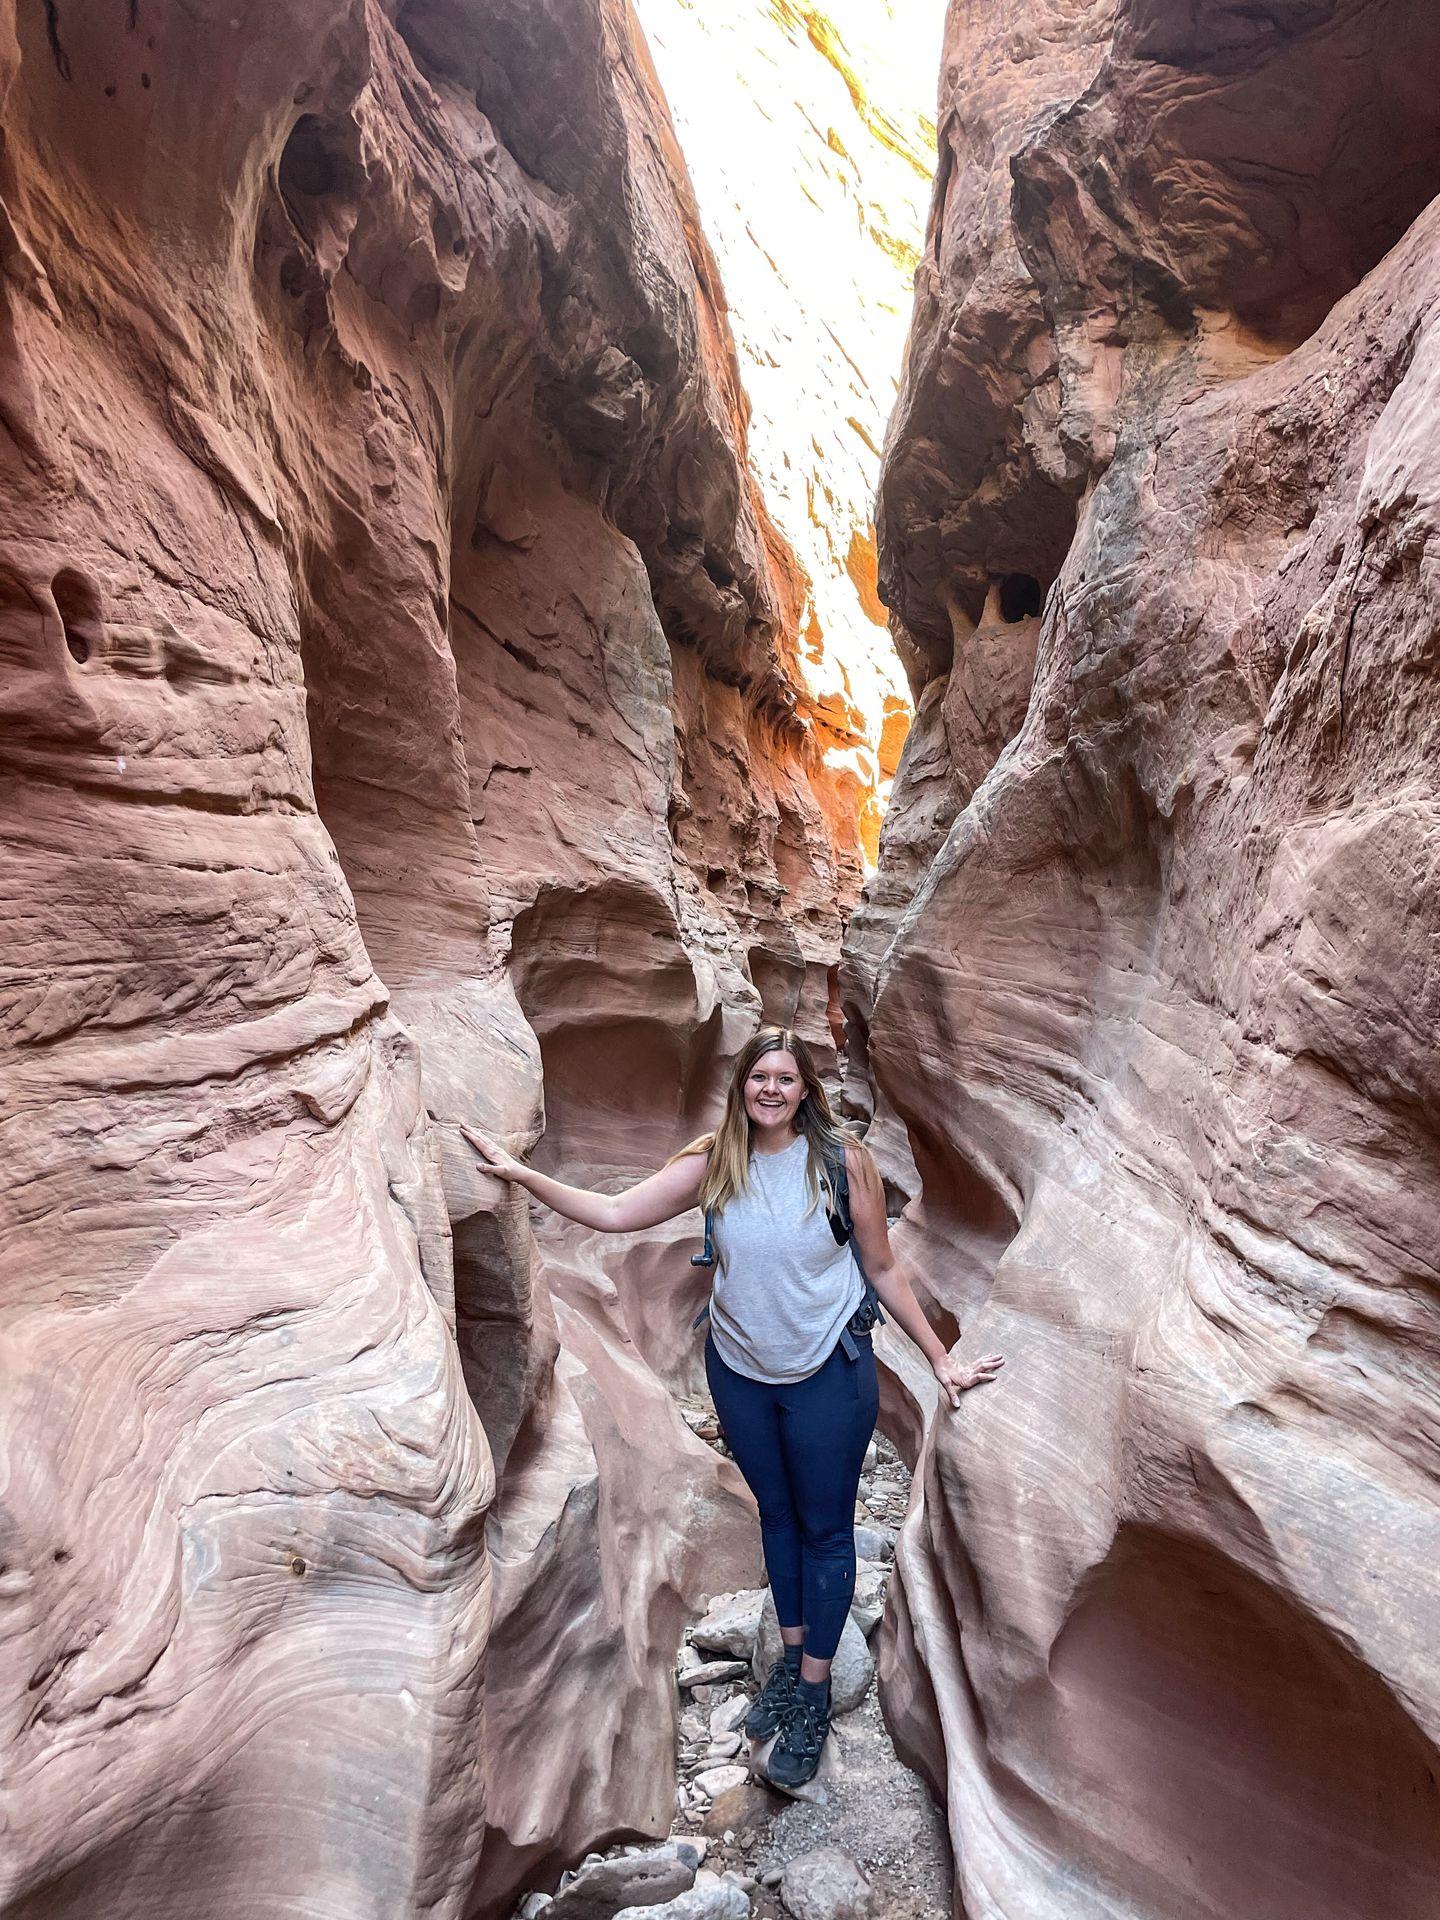 Lydia standing inside a narrow, orange slot canyon in Goblin Valley State Park.